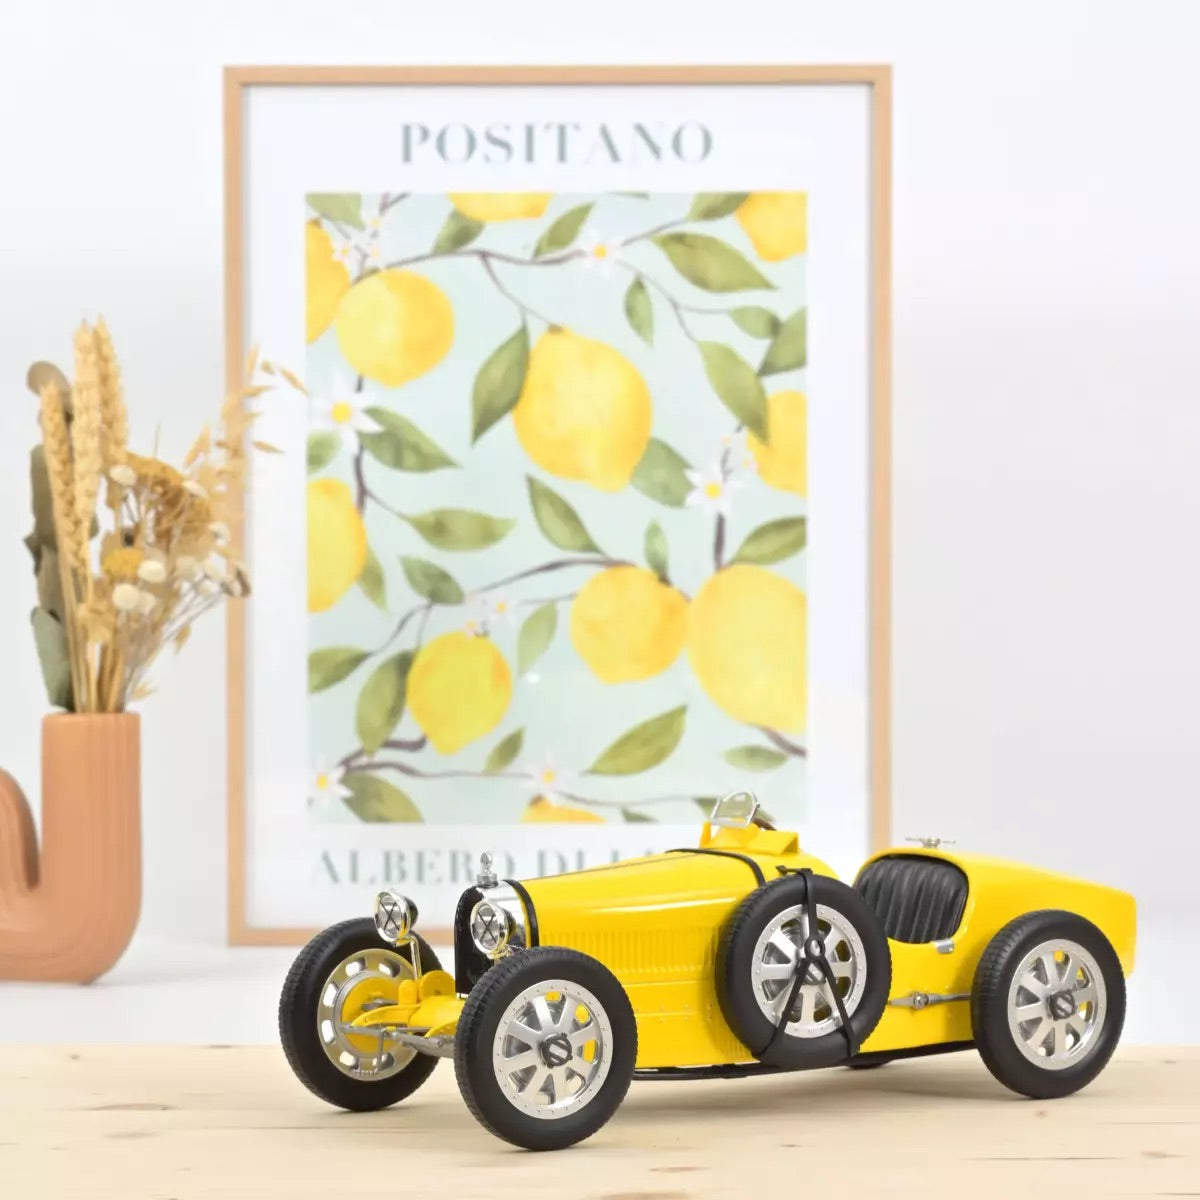 Norev 1:12 Bugatti T35 1925 - Yellow (Only 300 Made!)